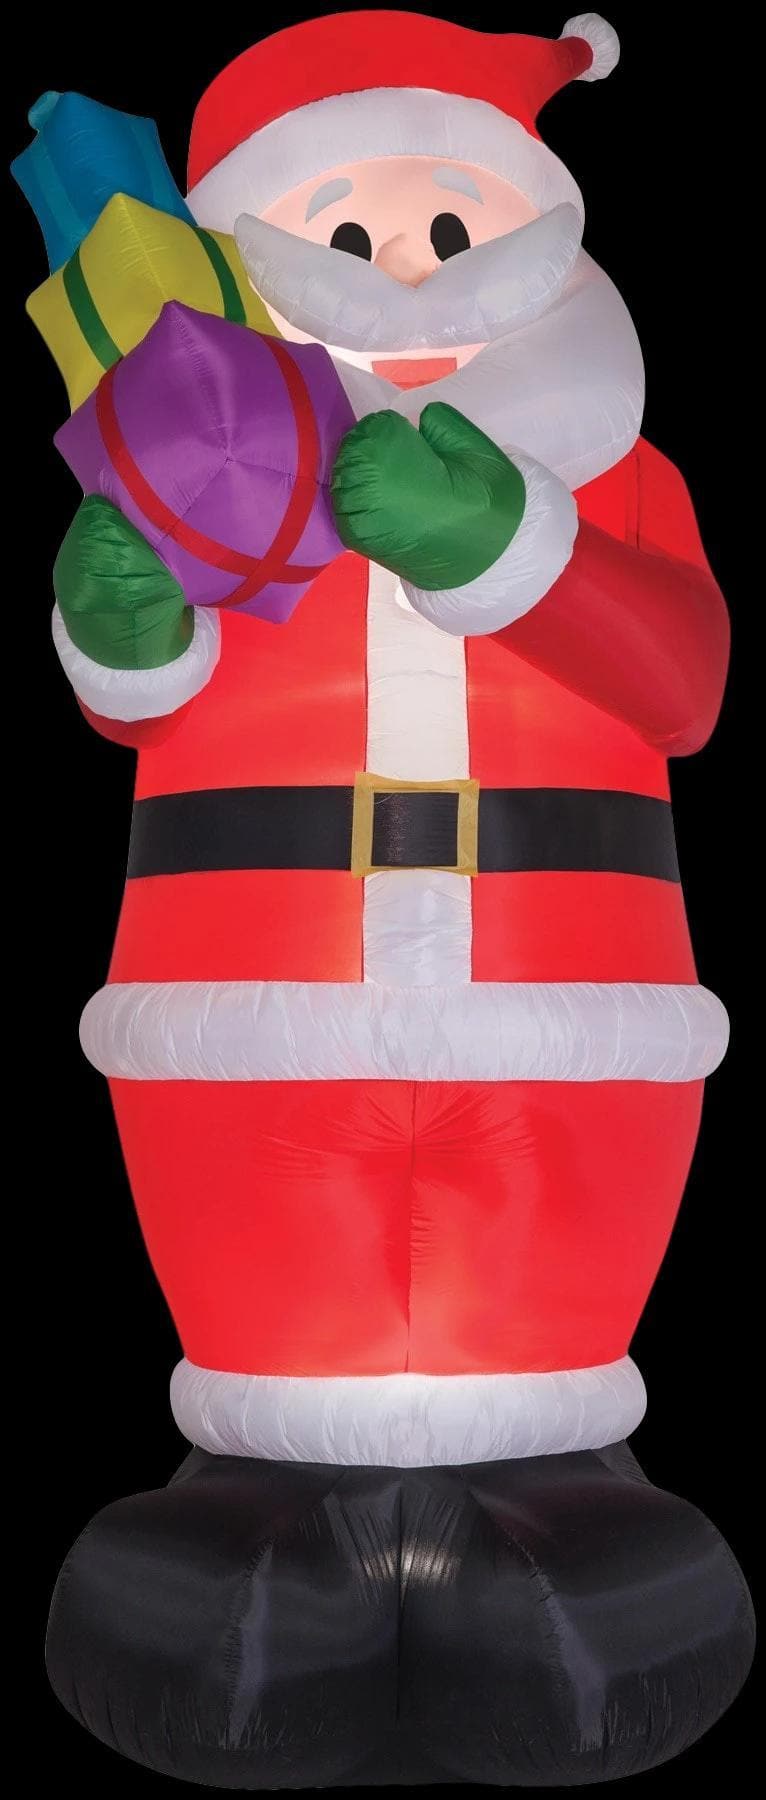 "Santa with Gifts - 16 Foot Tall" Air-Blown Inflatable Halloween Decoration